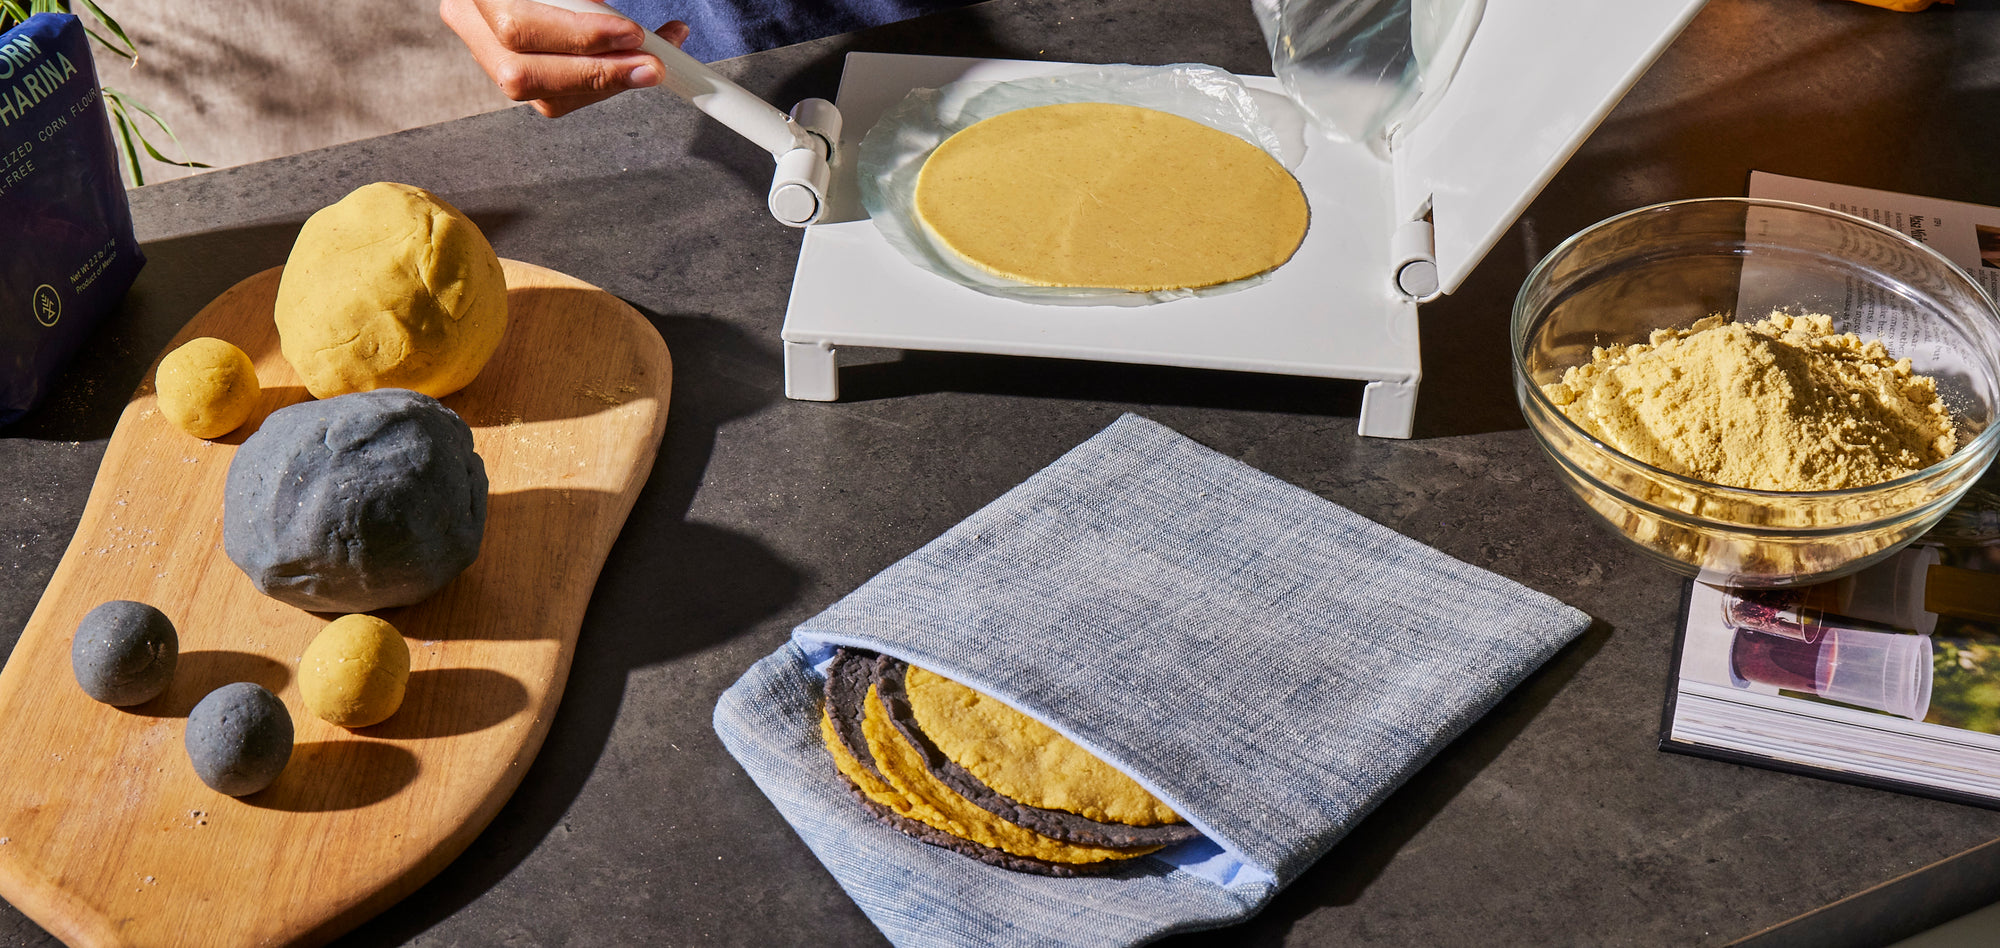 The Crucial Last Step to Making Homemade Tortillas